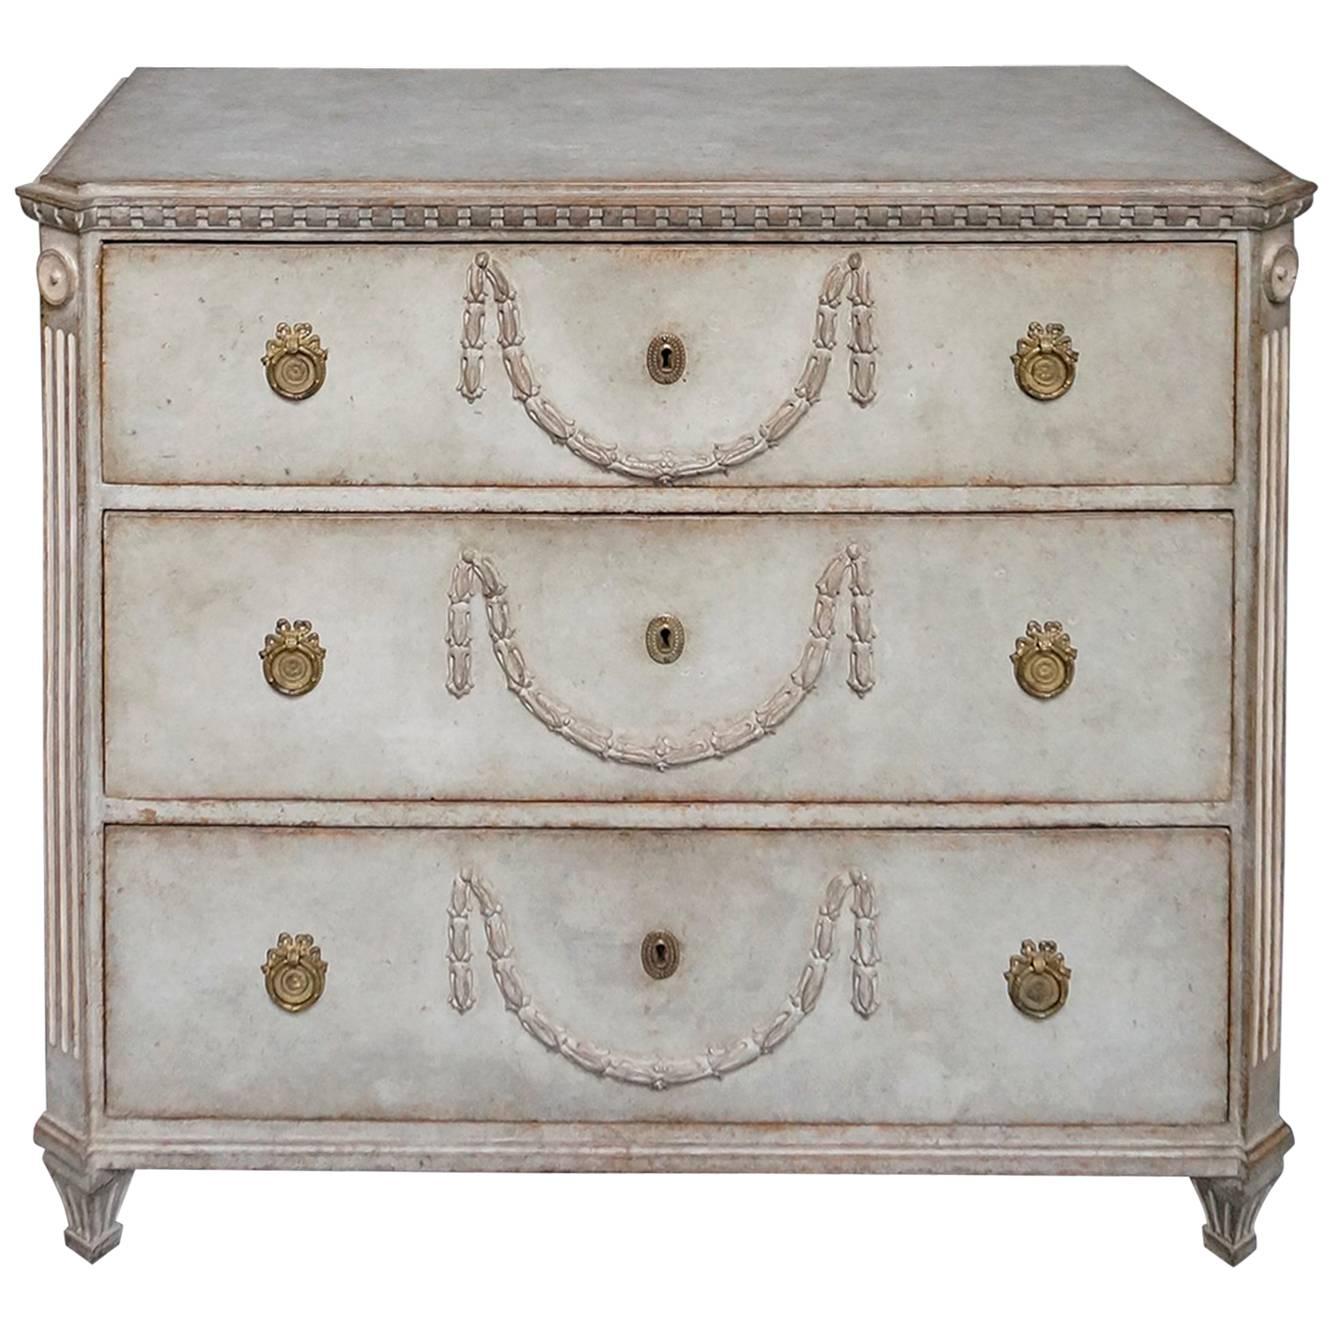 Neoclassical Chest of Drawers with Beautiful Detail